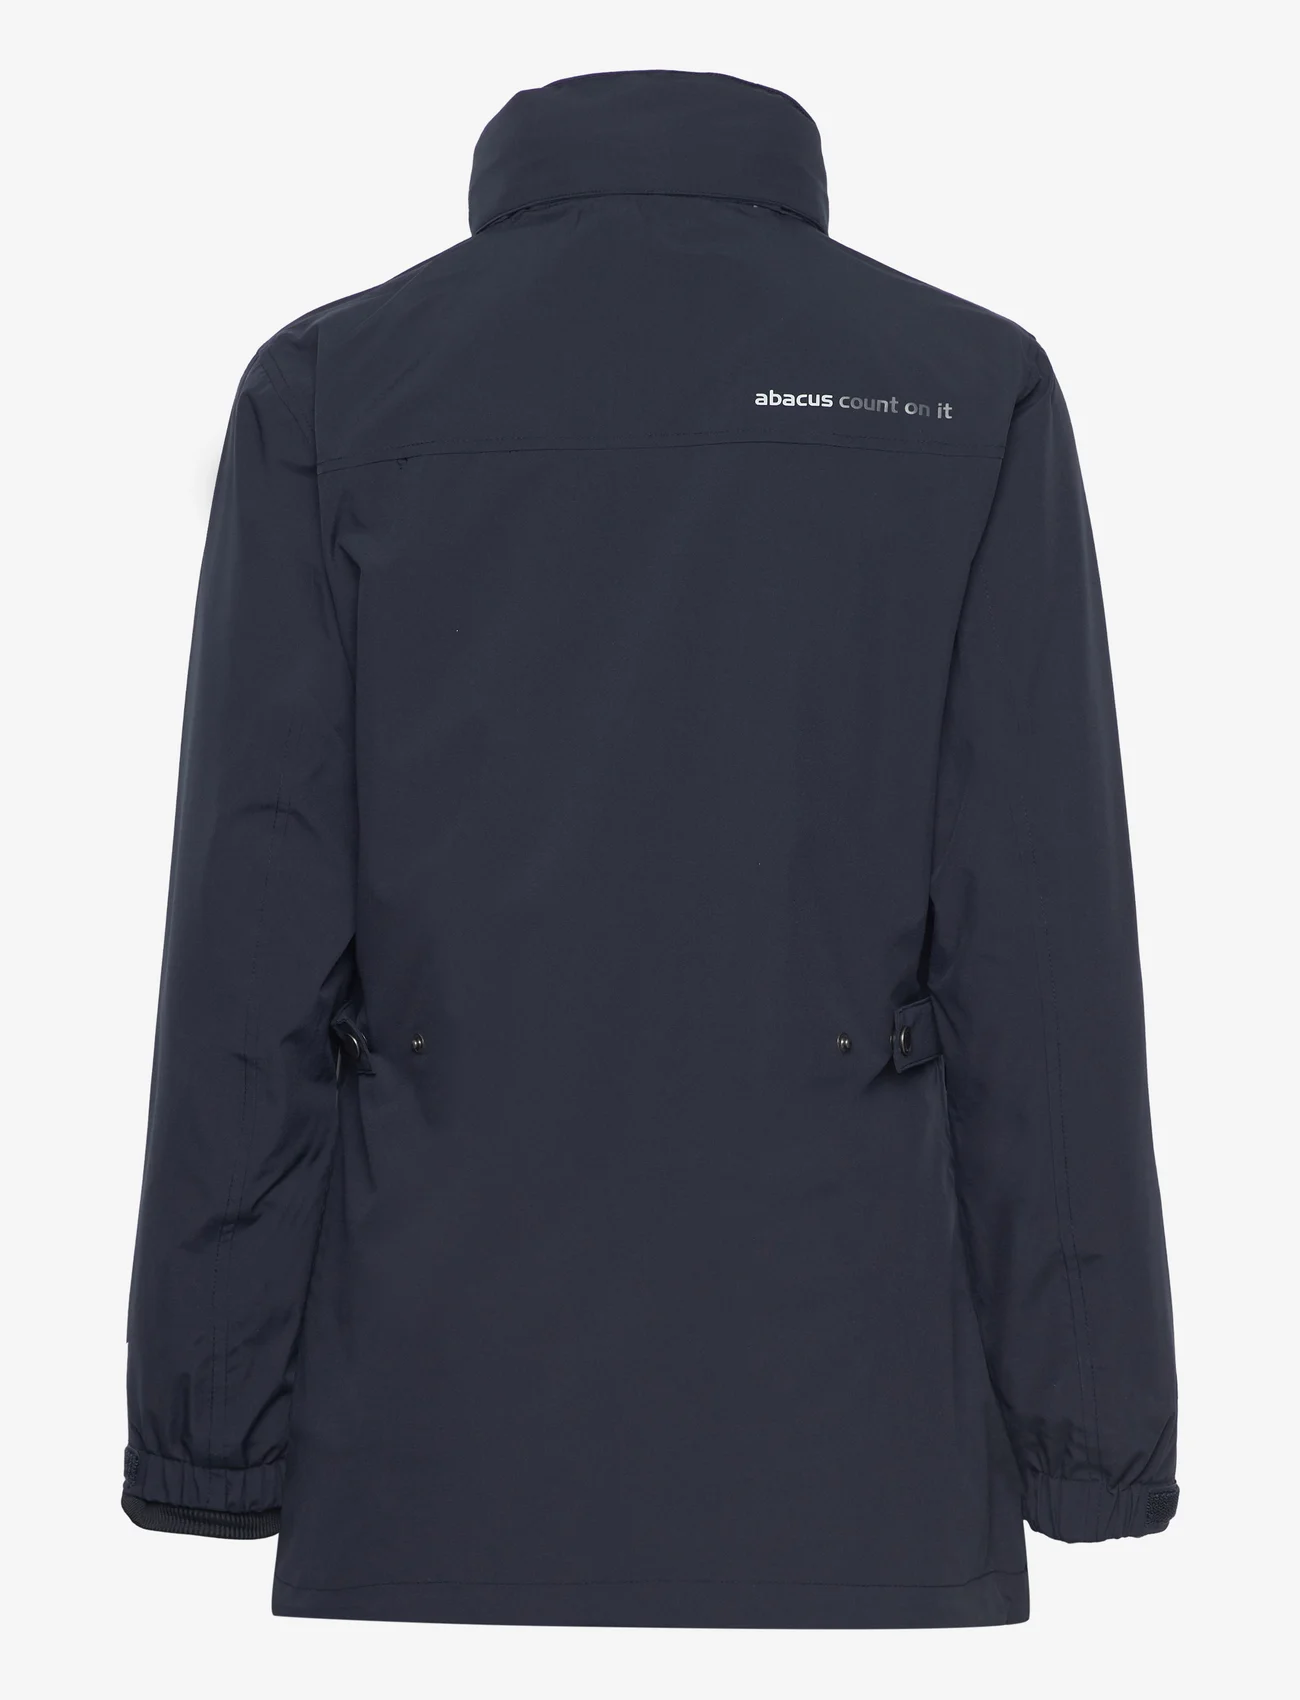 Abacus - Lds Staff 3 in1 jacket - parki - navy - 1